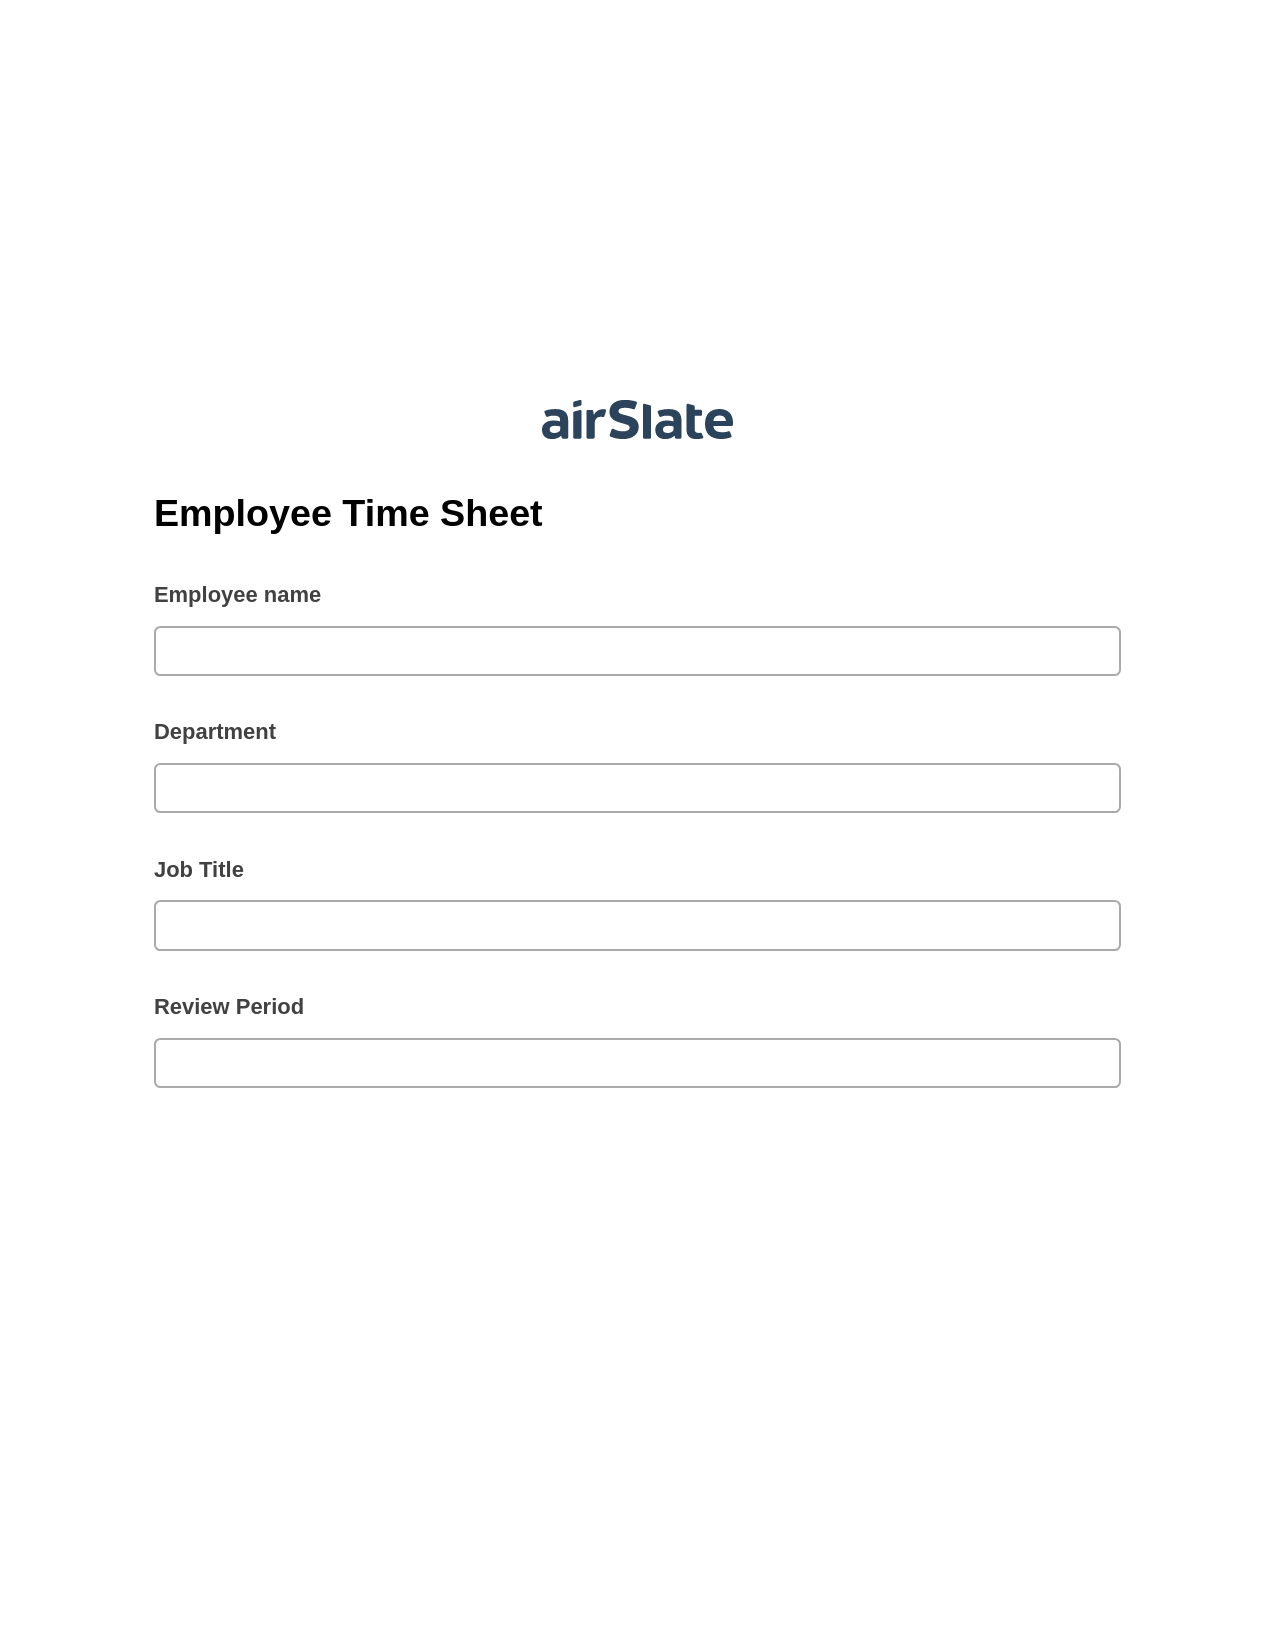 Employee Time Sheet Pre-fill Dropdowns from CSV file Bot, Update Audit Trail Bot, Archive to Dropbox Bot